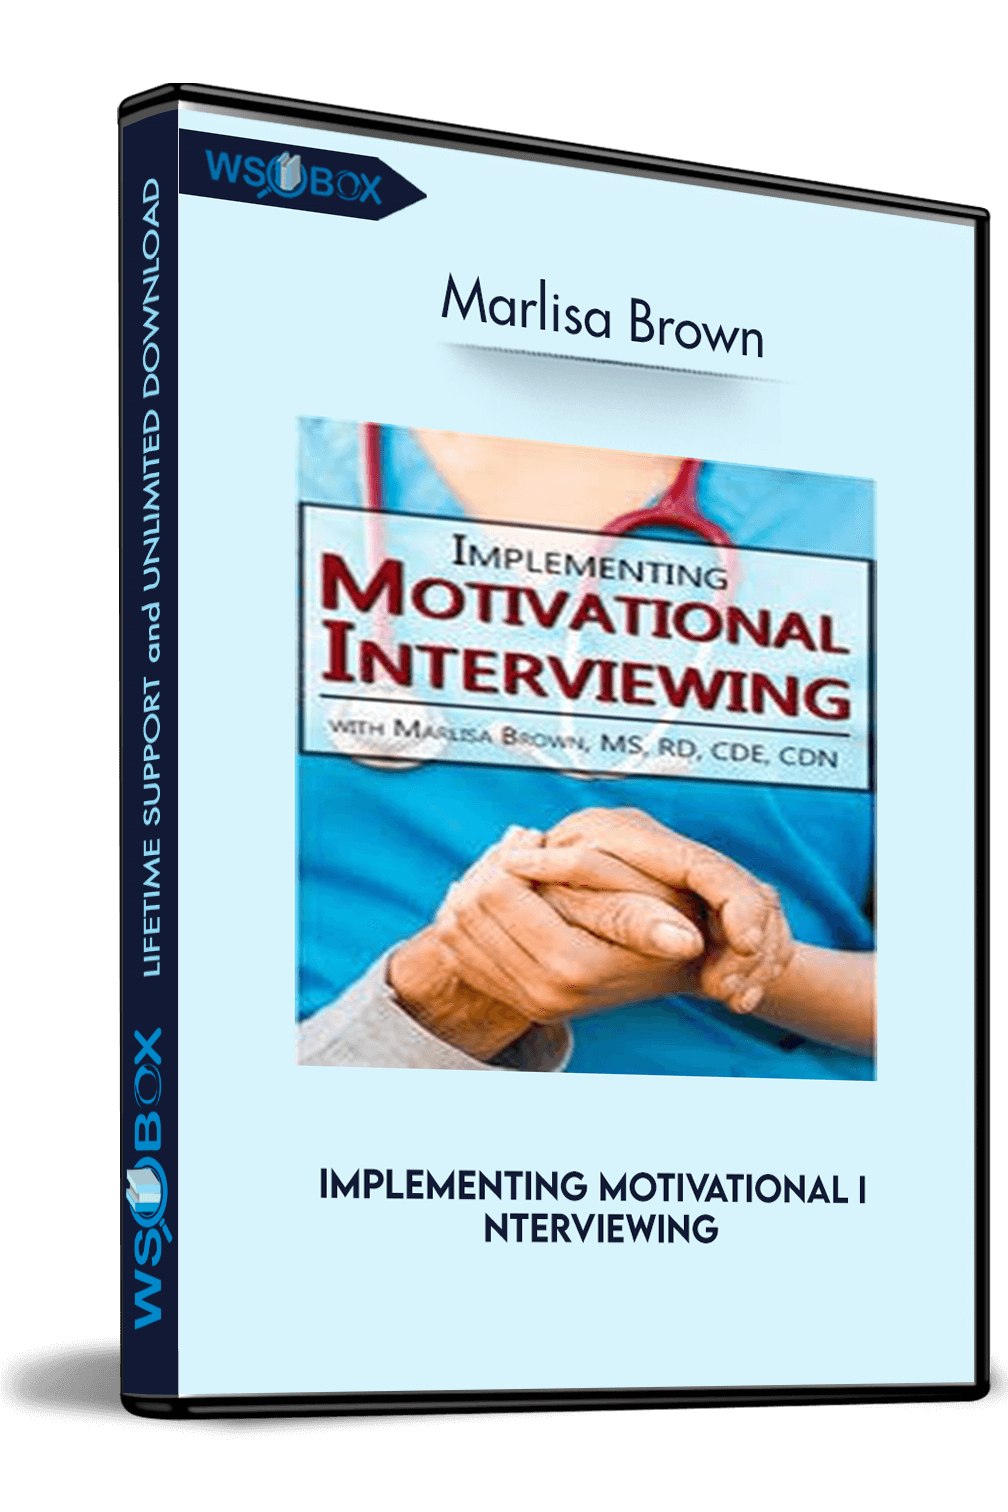 Implementing Motivational Interviewing – Marlisa Brown